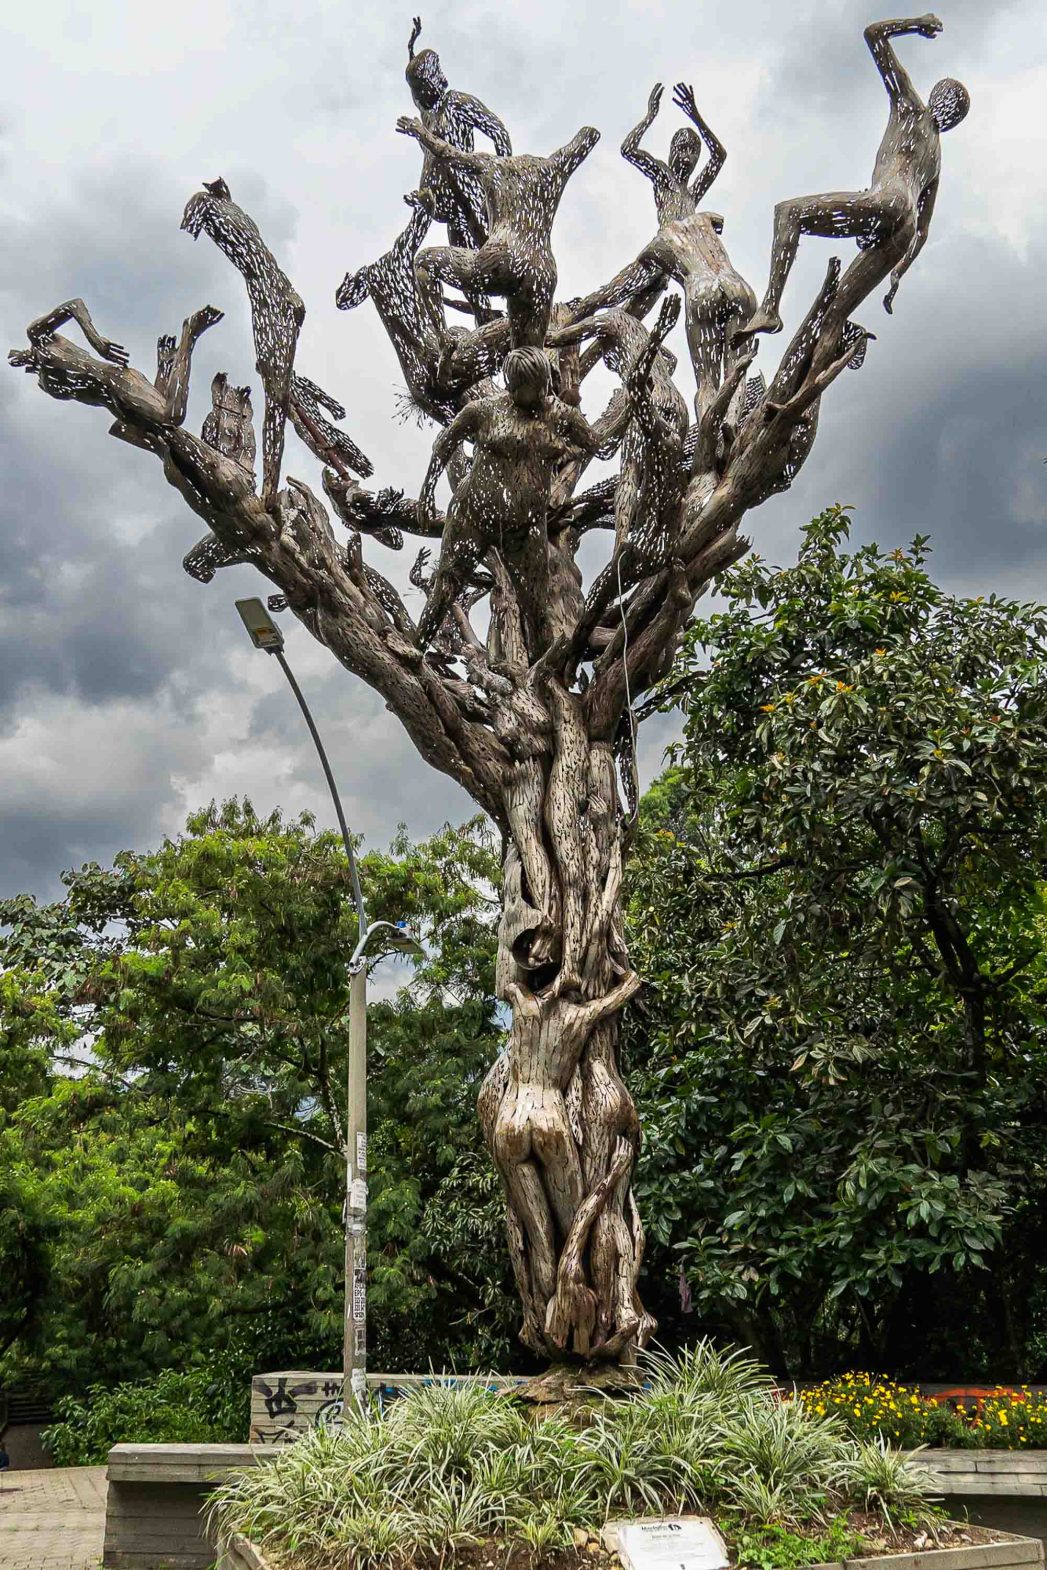 Arbol de la vida or tree of life is a tree statue with a cluster of naked, metallic bodies form the trunk, their limbs entwined.